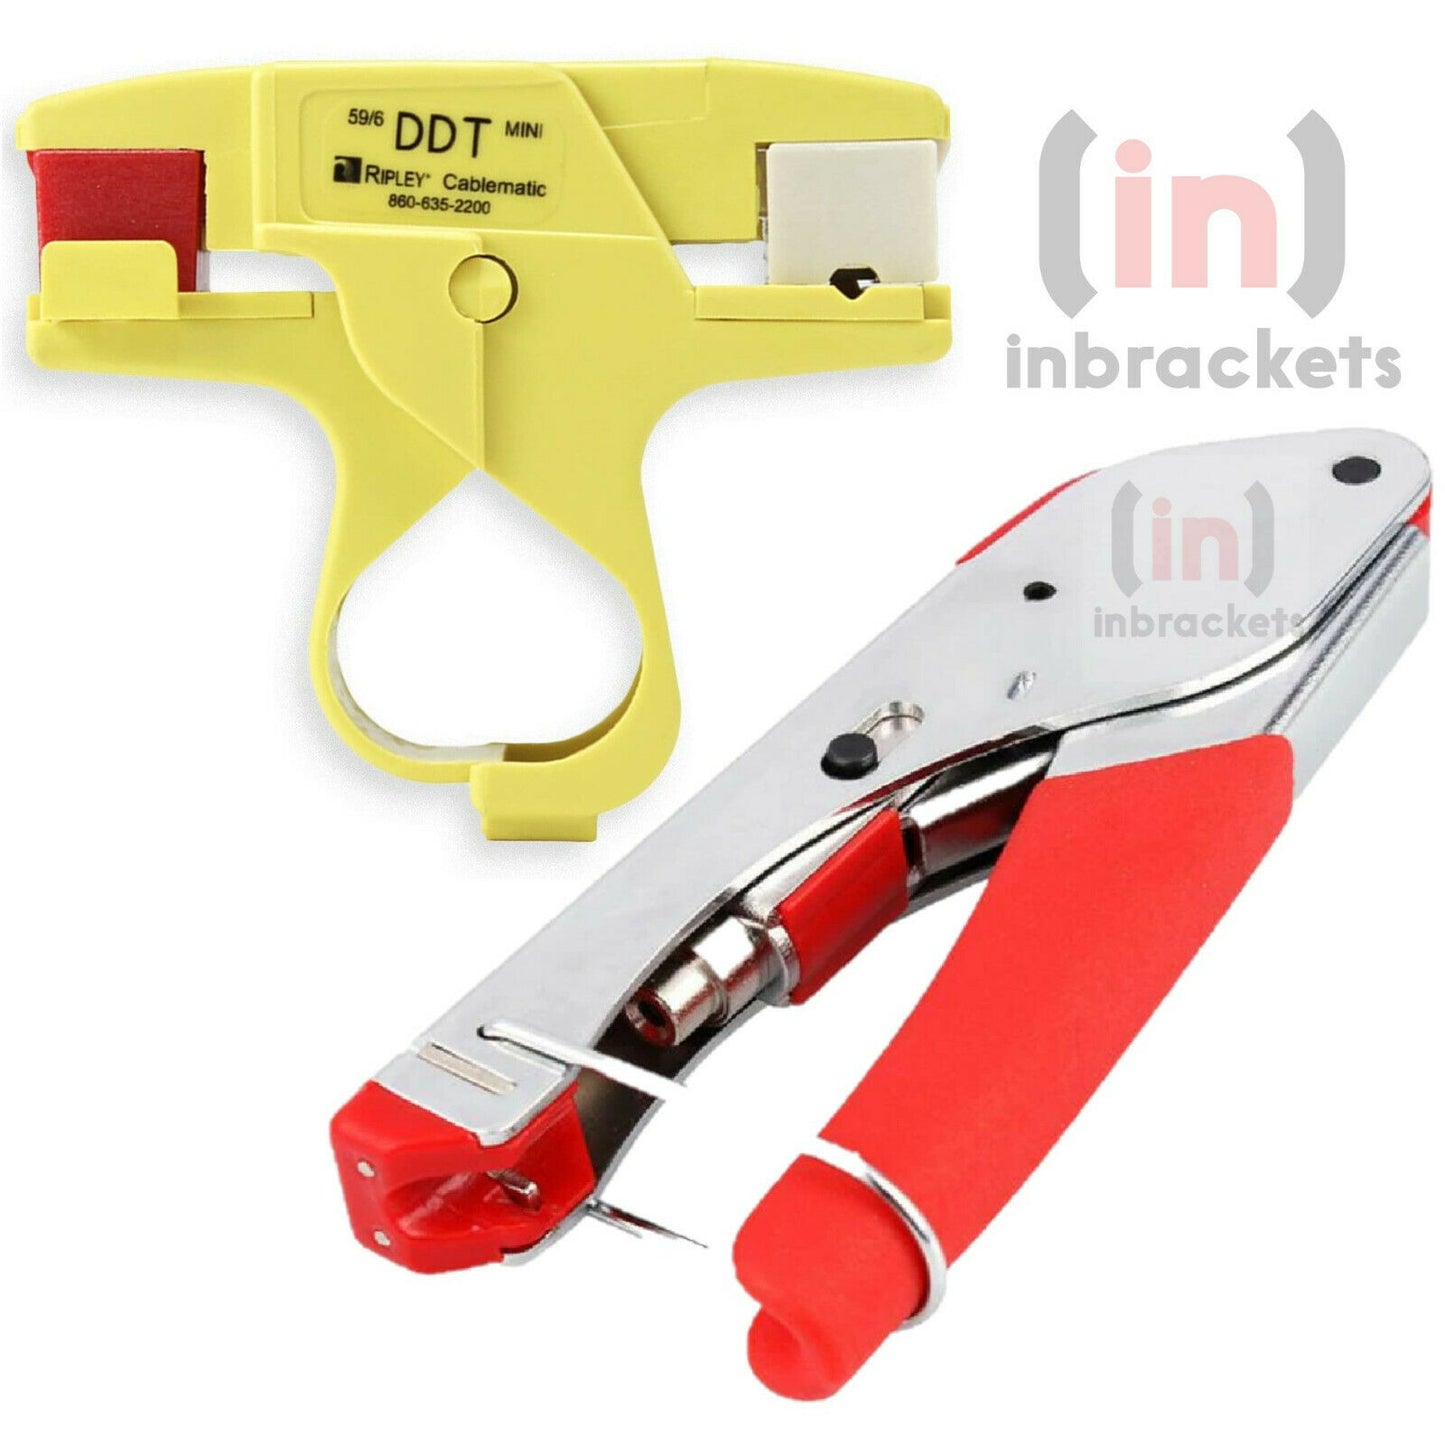 Cablematic Dual Drop Professional Cable Stripper